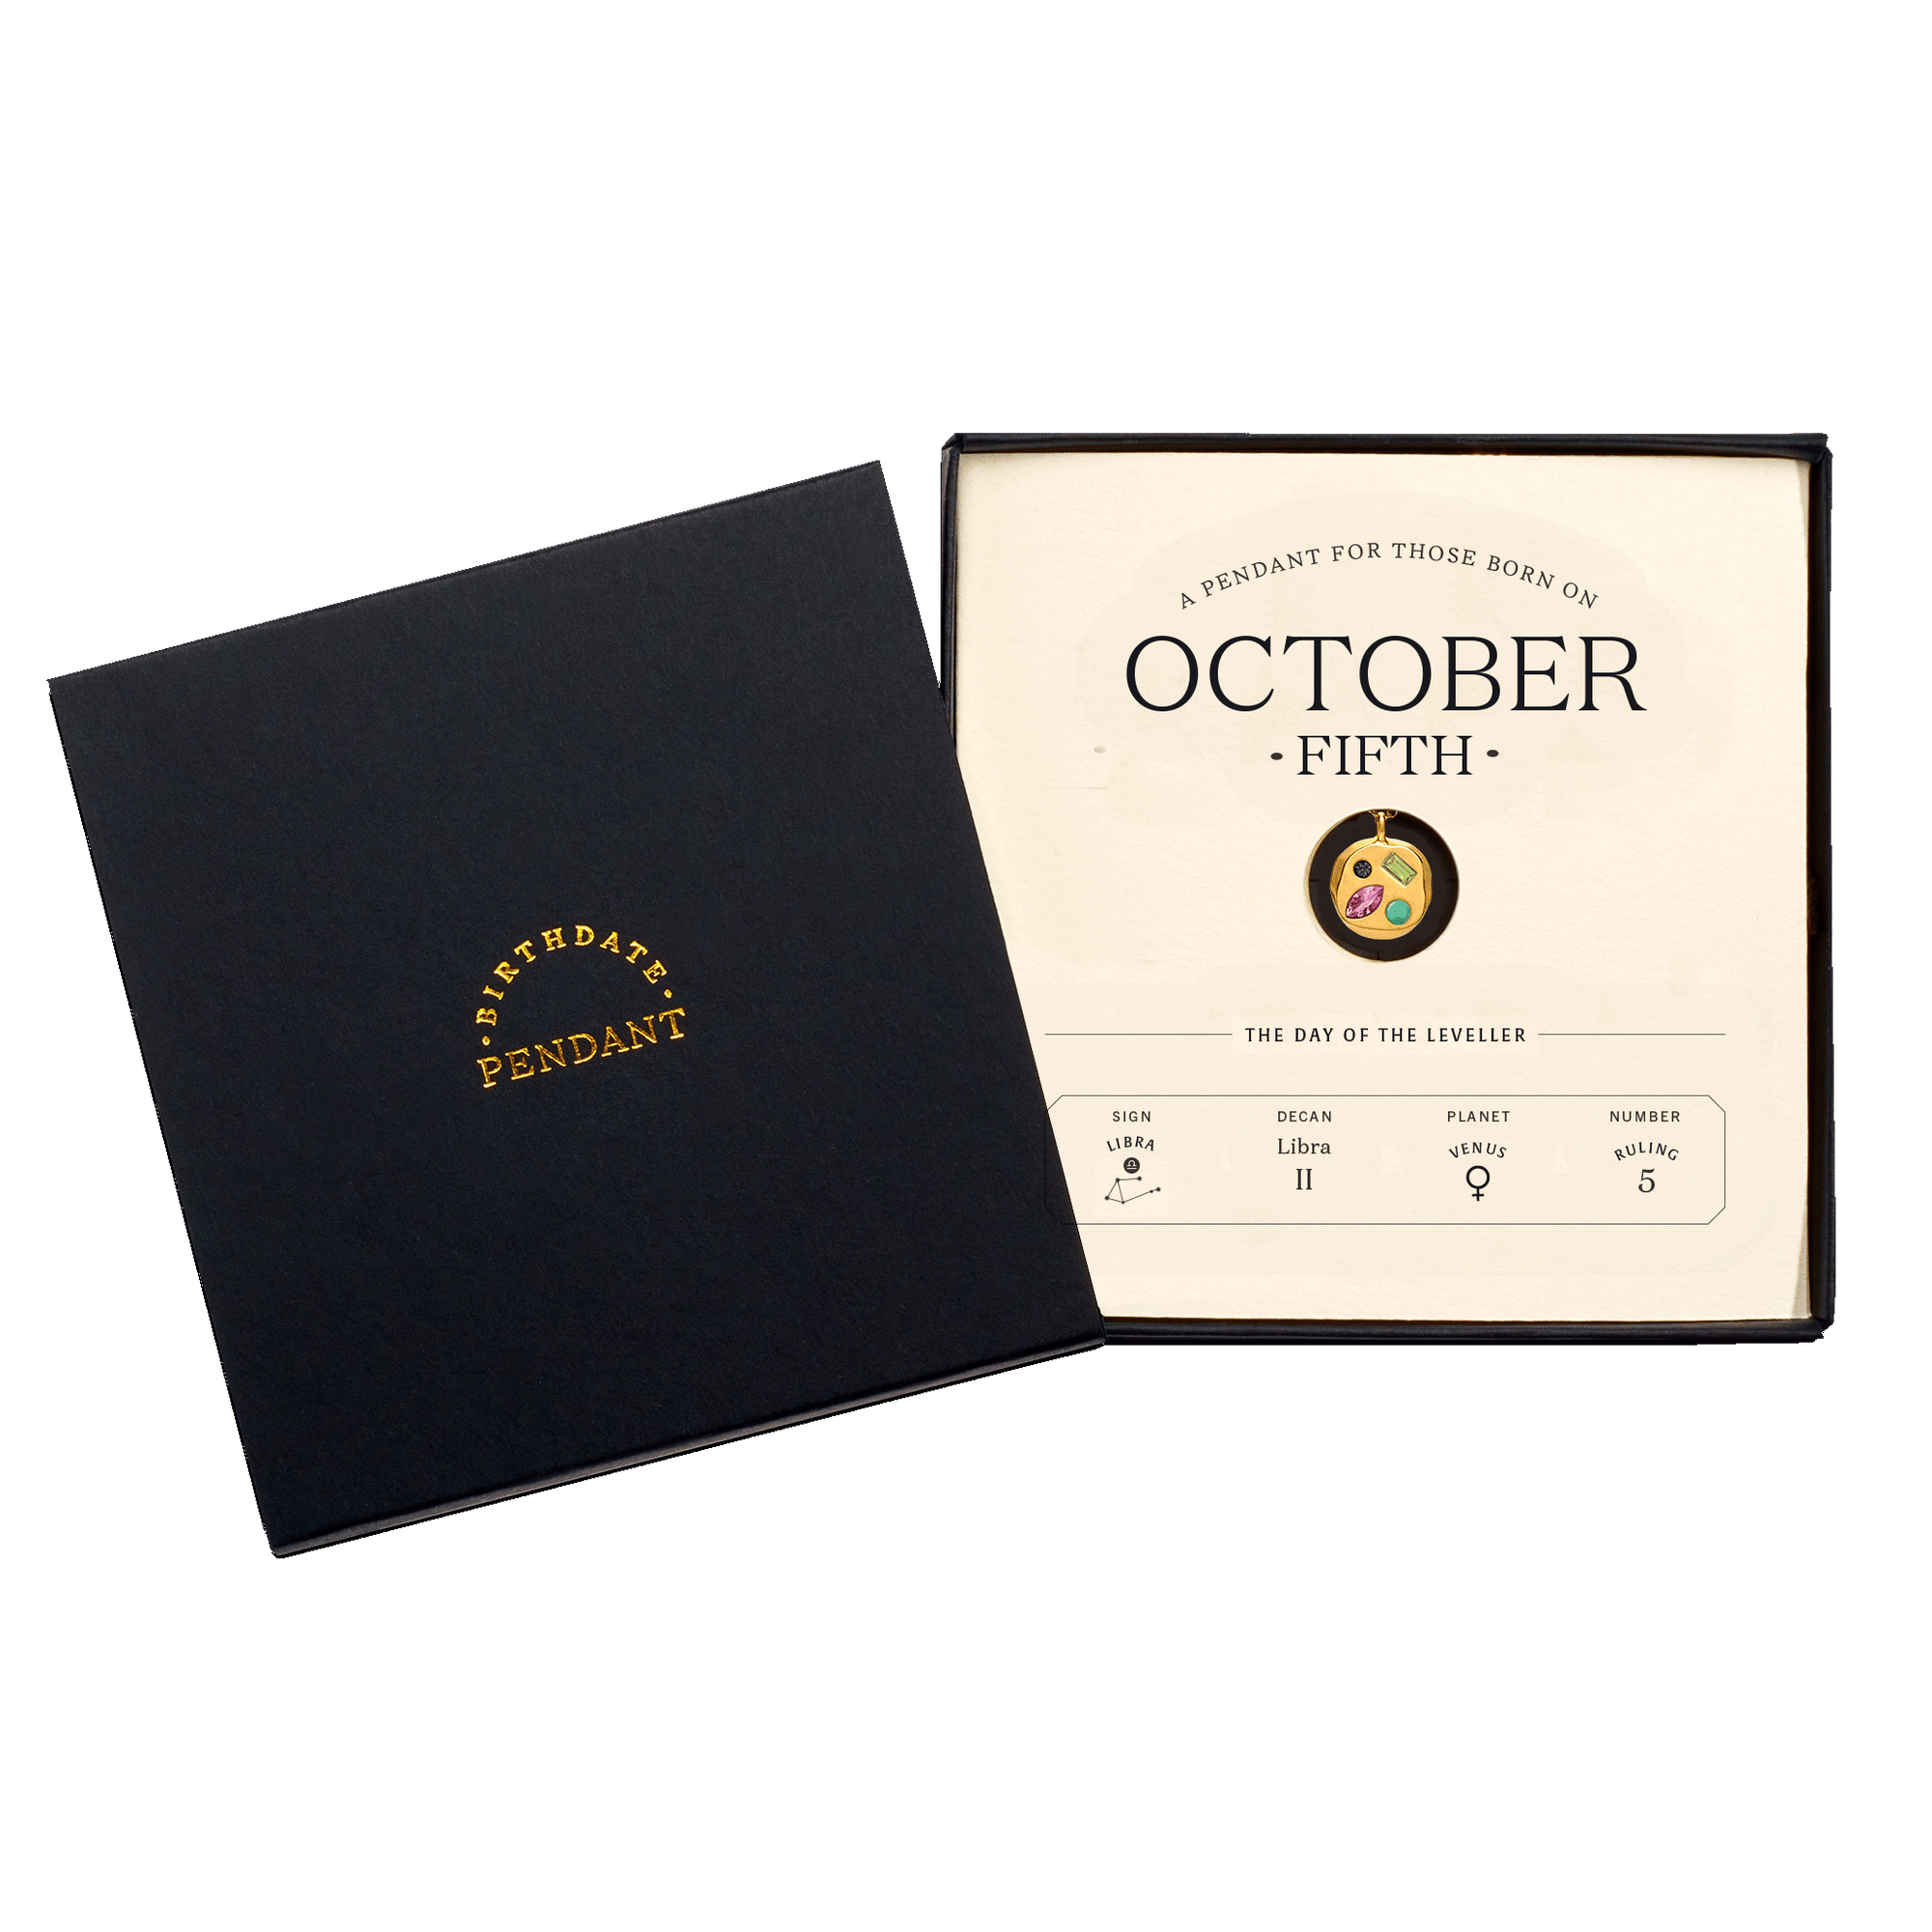 The October Fifth Pendant inside its box